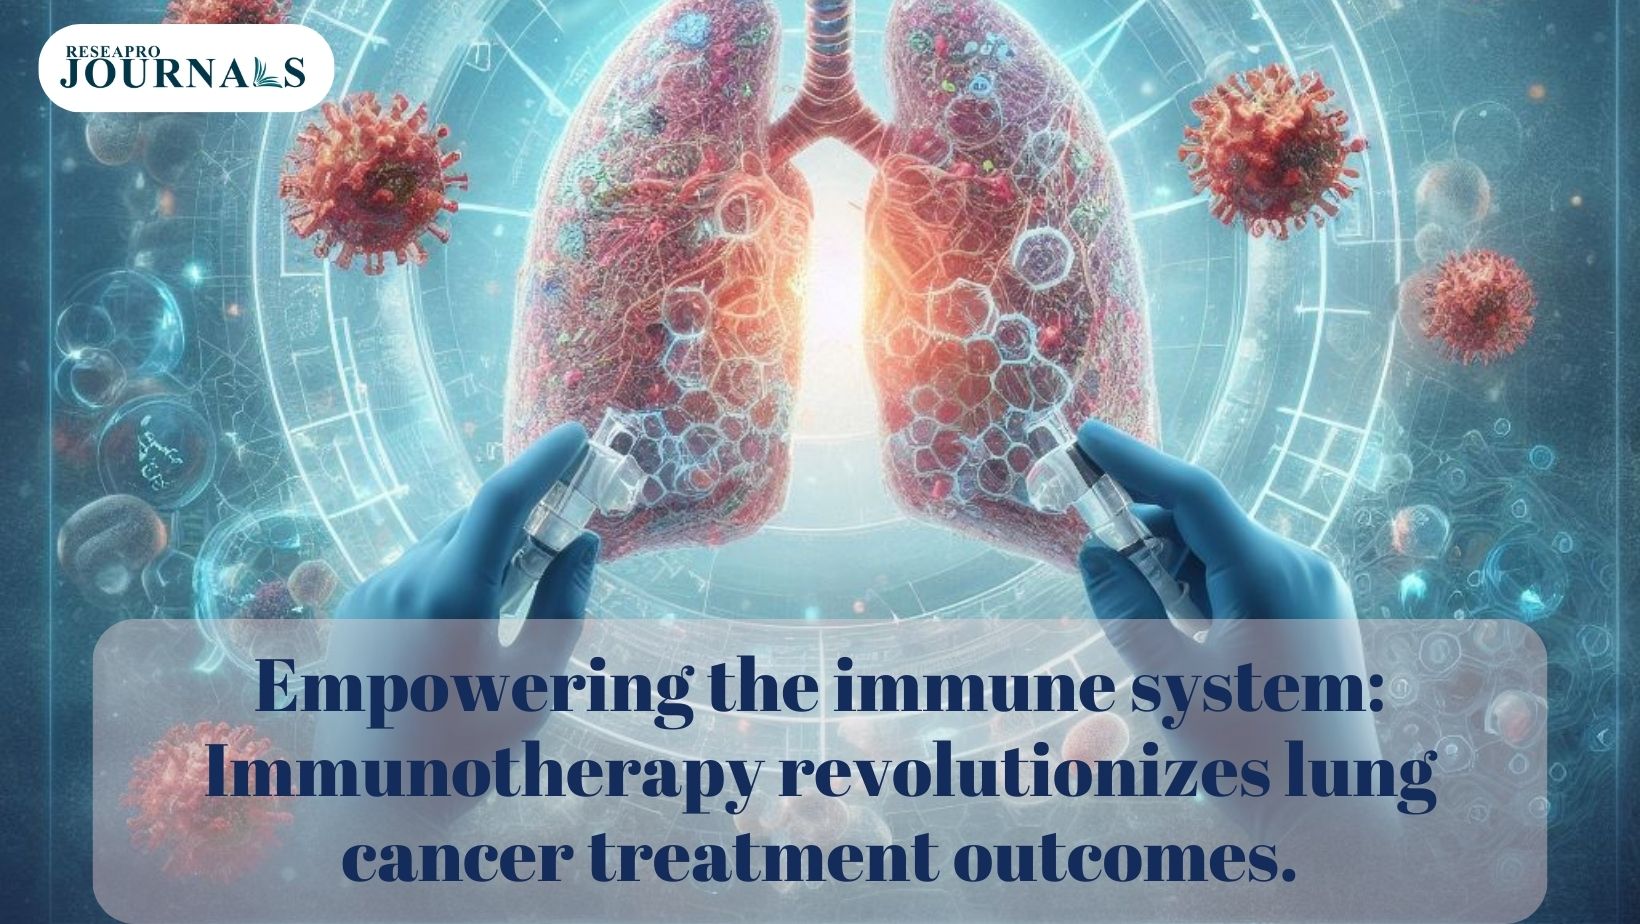 Empowering the immune system: Immunotherapy revolutionizes lung cancer treatment outcomes.